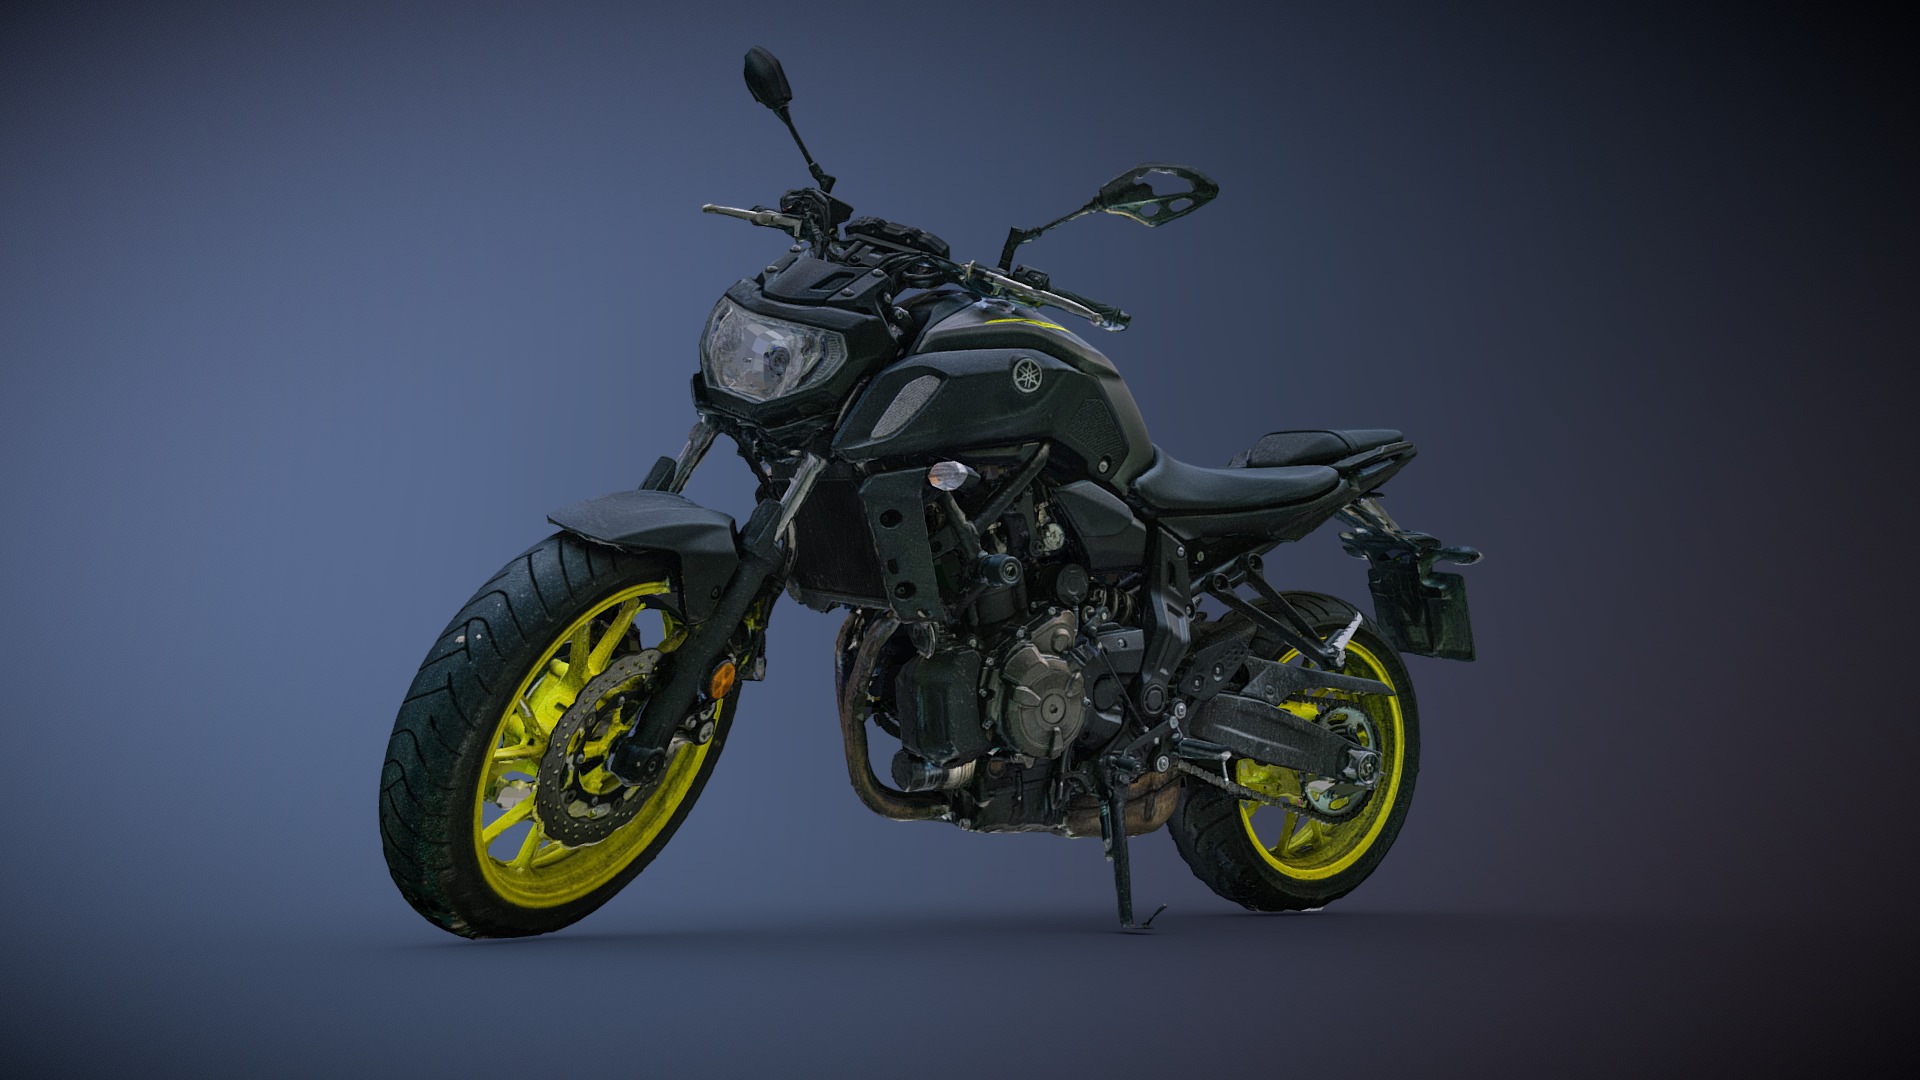 3D model Yamaha CP2 motorcycle raw photogrammetry scan - This is a 3D model of the Yamaha CP2 motorcycle raw photogrammetry scan. The 3D model is about a motorcycle with yellow wheels.